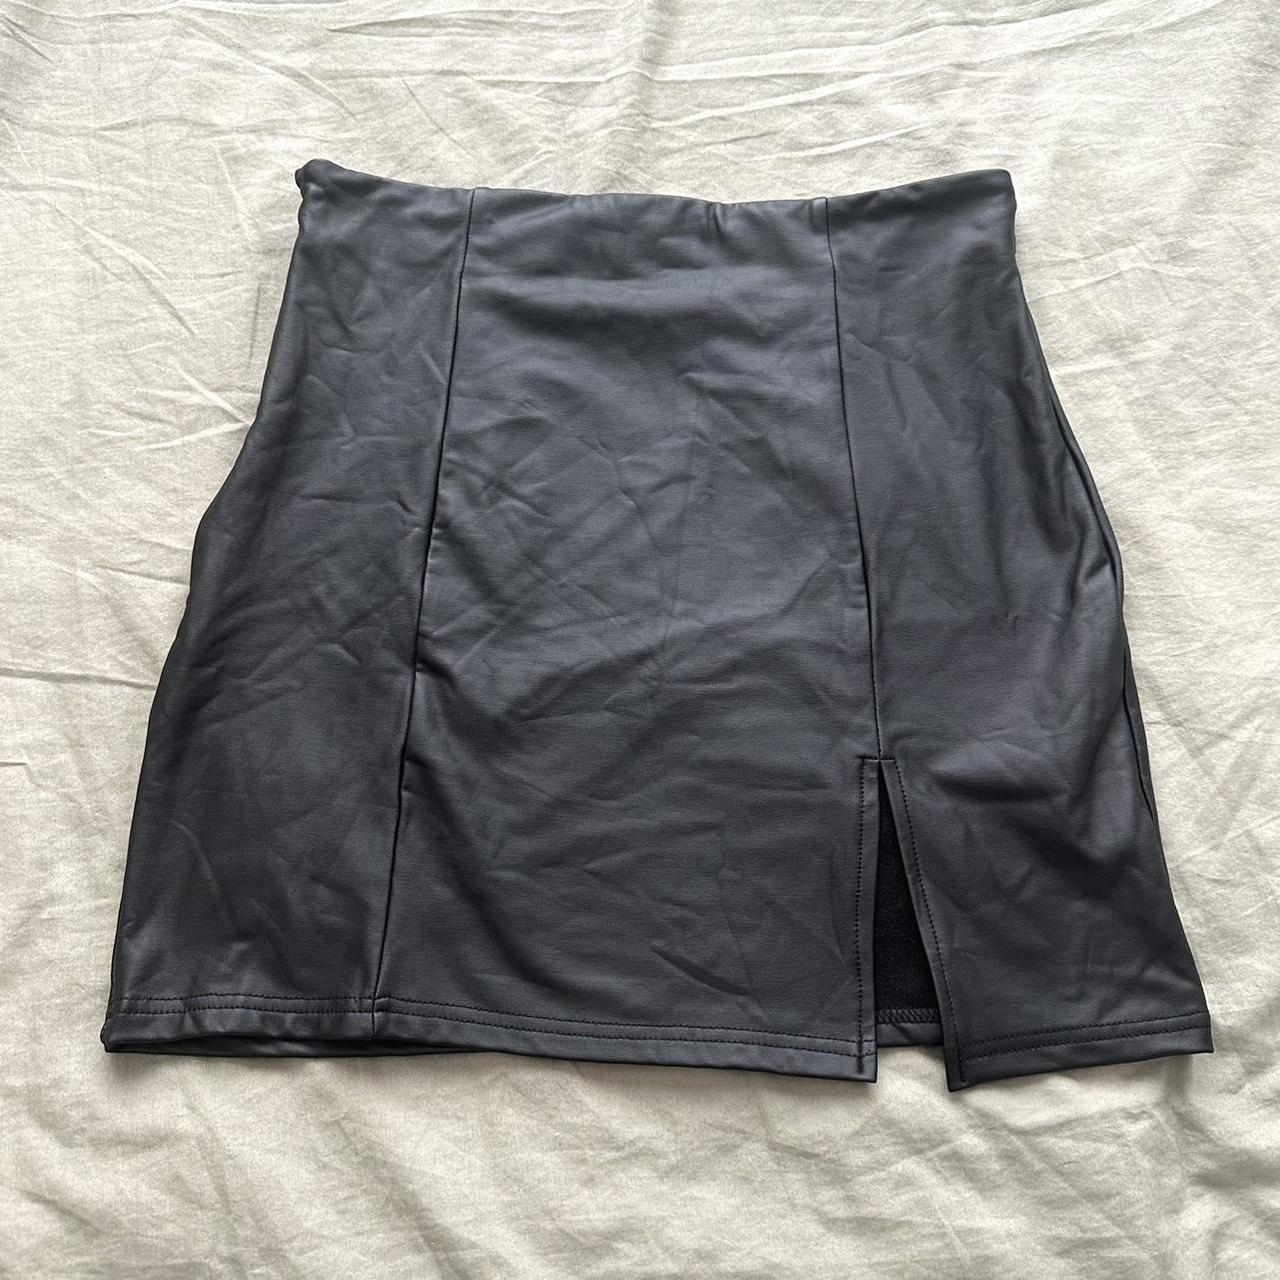 Shein leather mini skirt fake leather with... - Depop